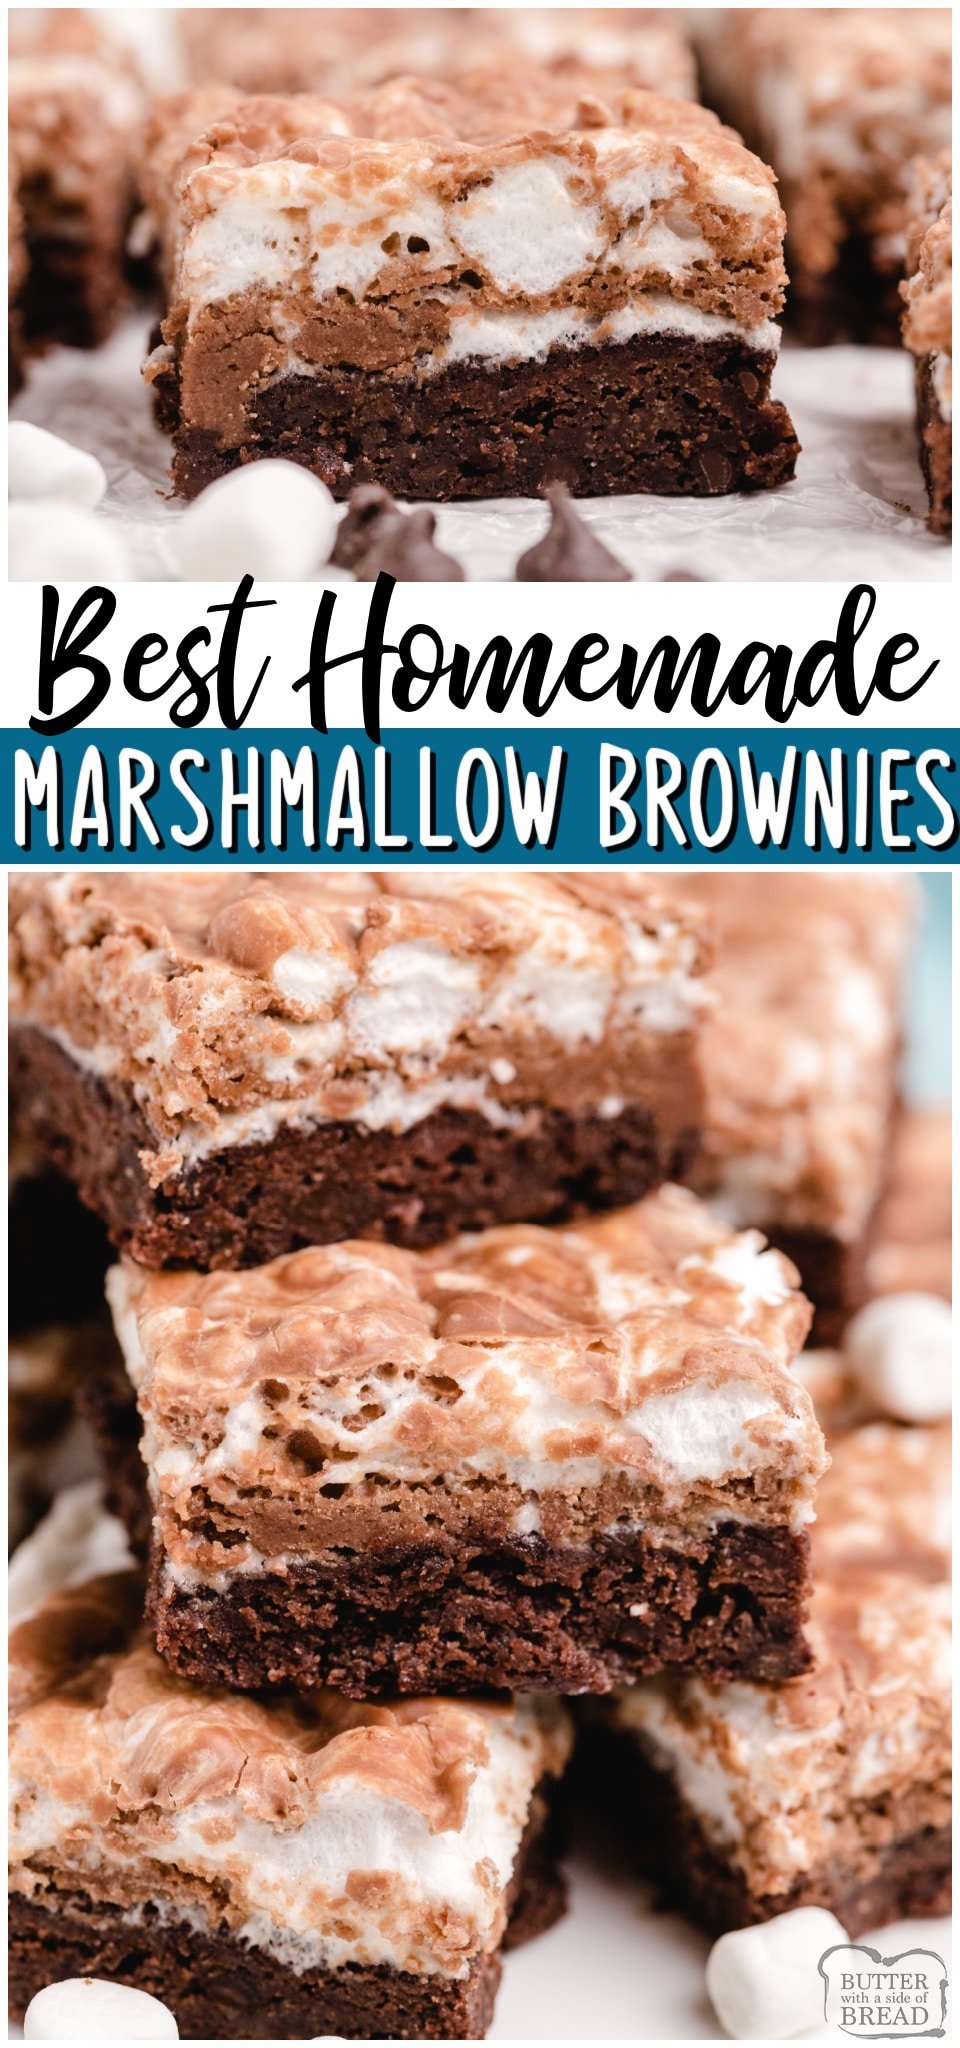 Homemade Marshmallow Brownies are fudgy, chocolaty brownies with a melted marshmallow topping! Perfect from scratch brownie recipe for anyone who loves chocolate & marshmallows!